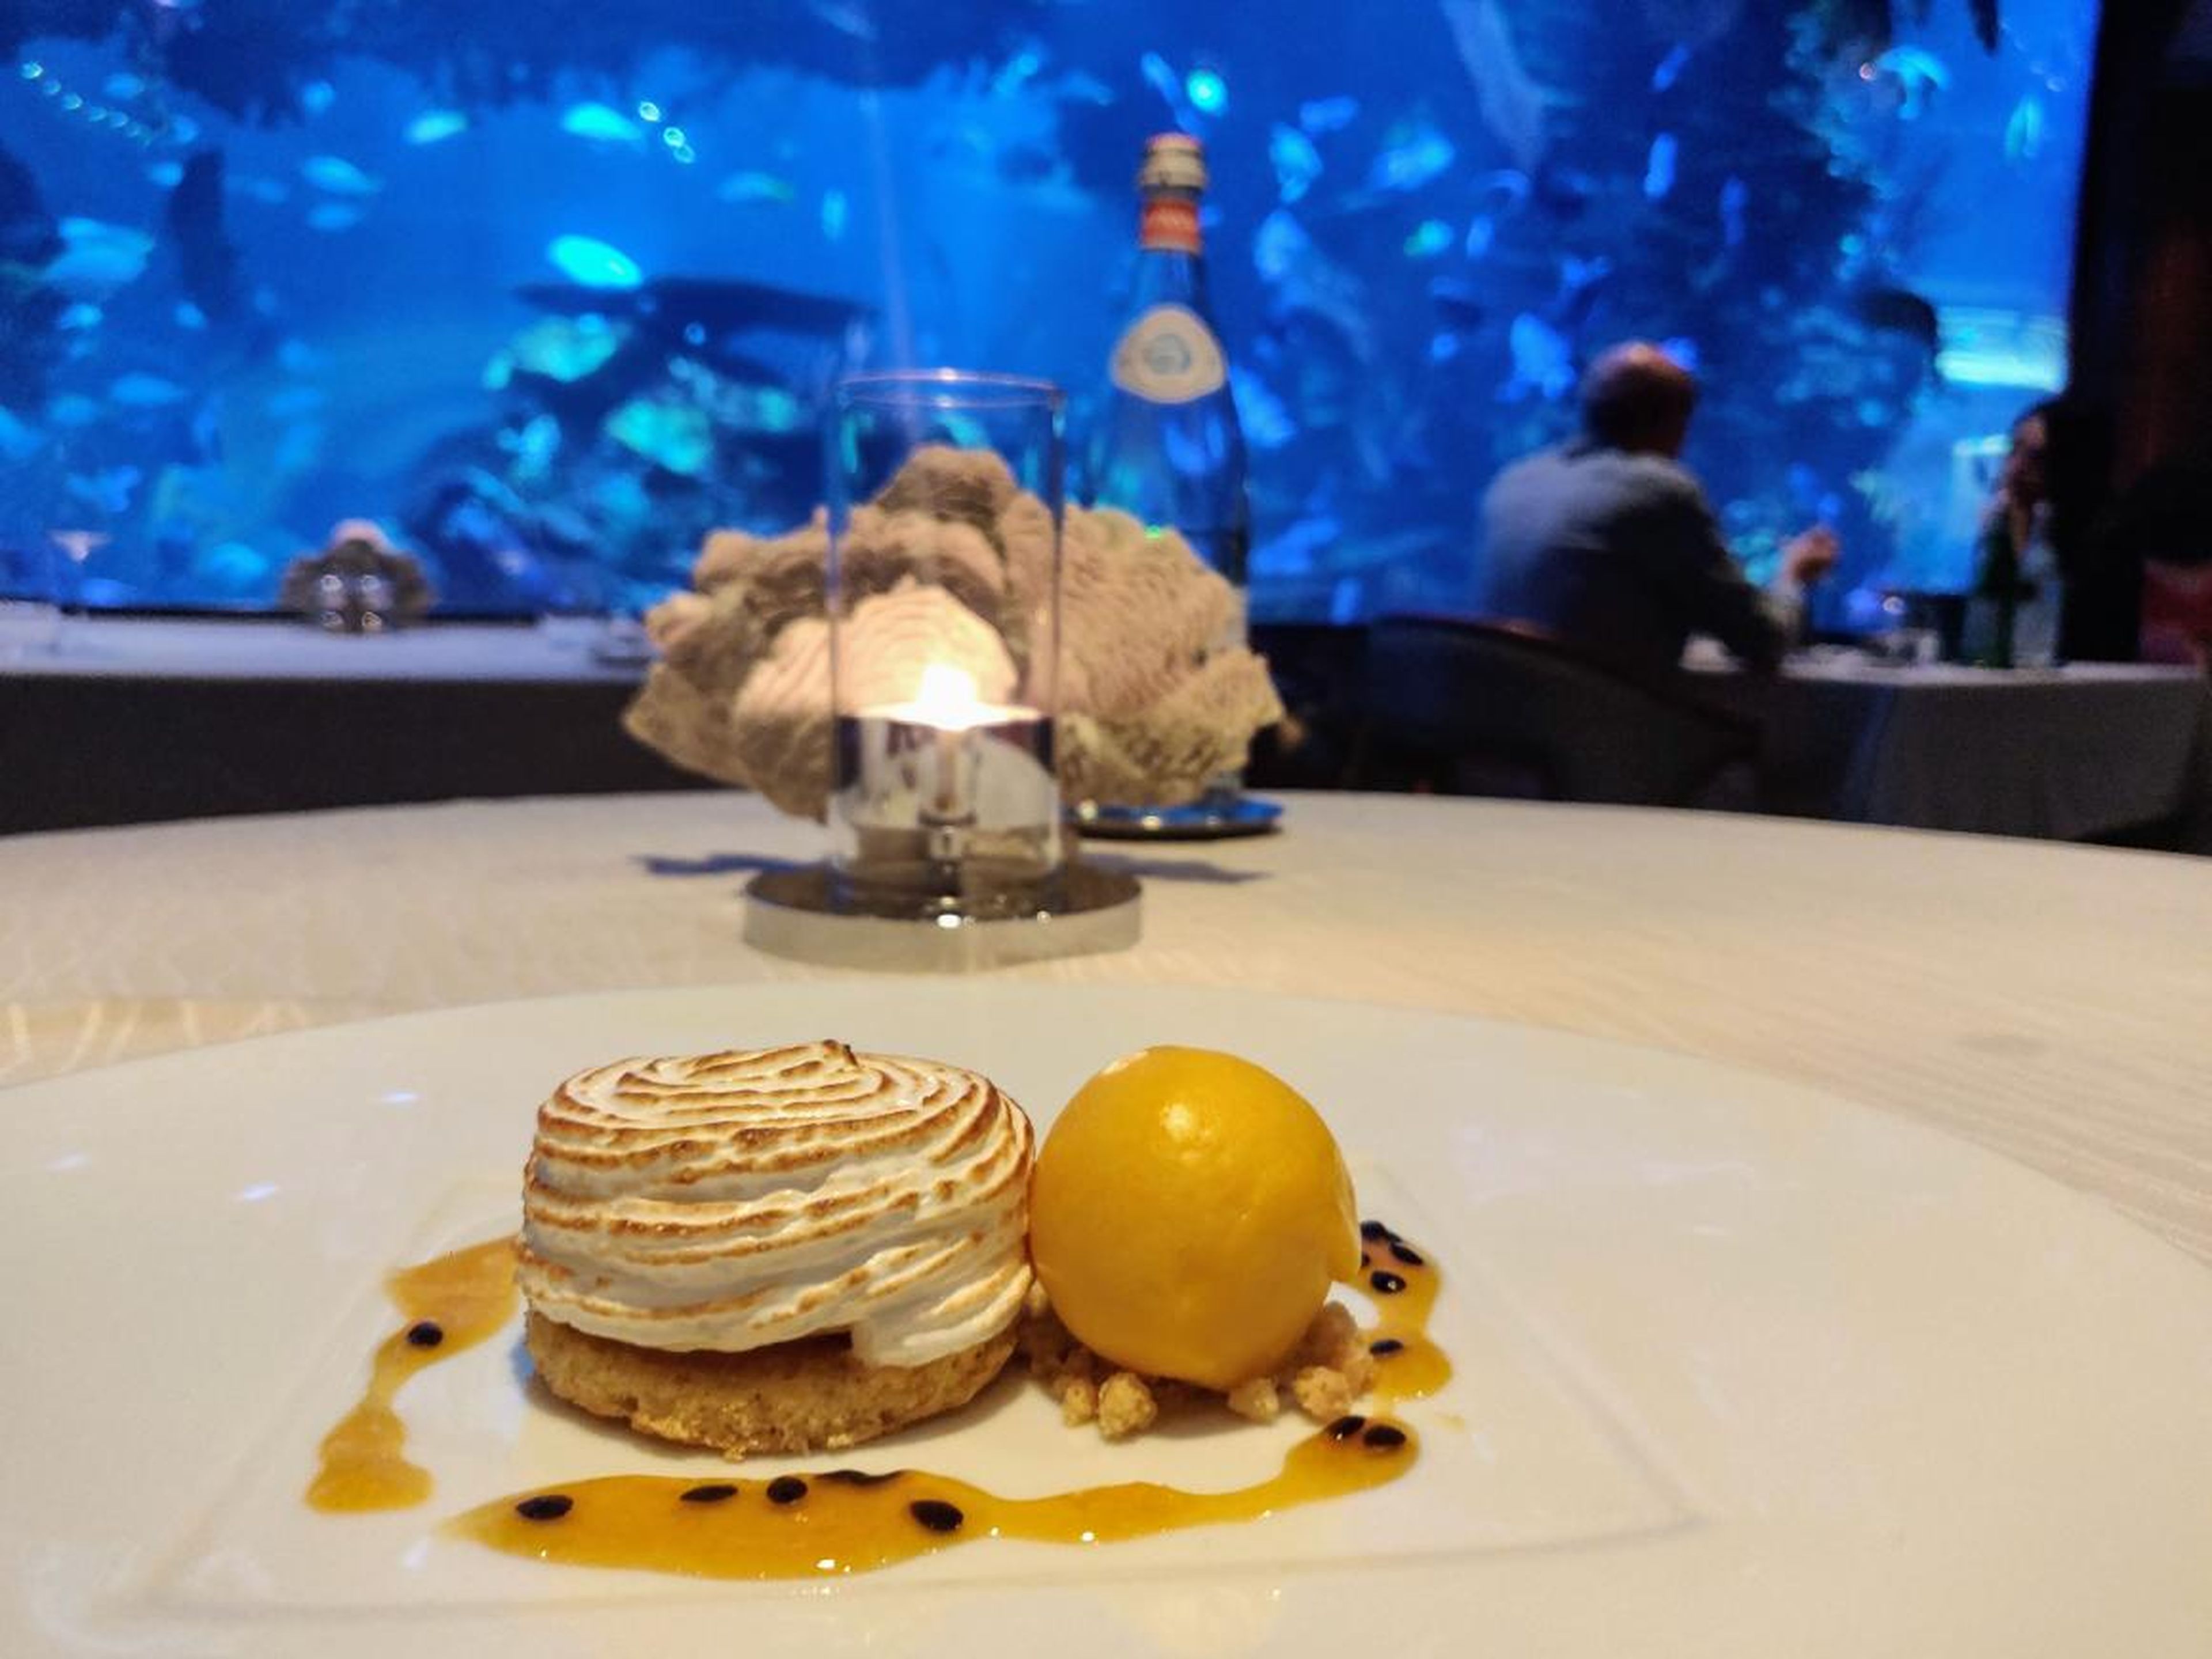 For dessert — I was so stuffed that I can't believe I even ordered it — I had the passionfruit baked Alaska with mango sorbet ($26). After the taste-bud overkill of the fried oysters and truffle-topped lobster, the mellow, sweet